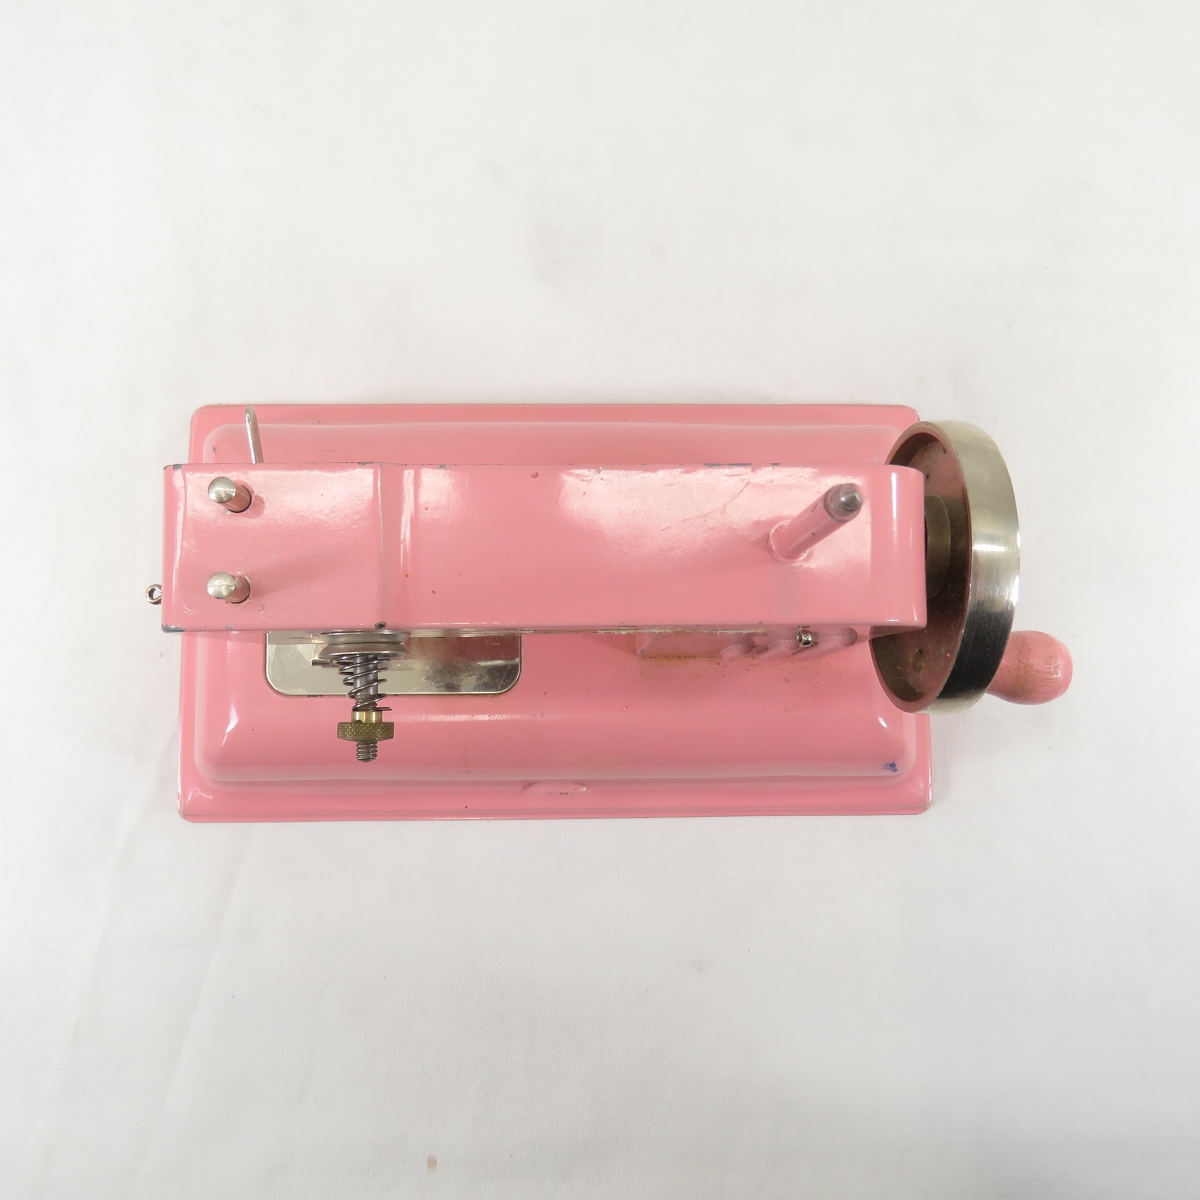 Pink KAY an EE Sew Master Child's Sewing Machine